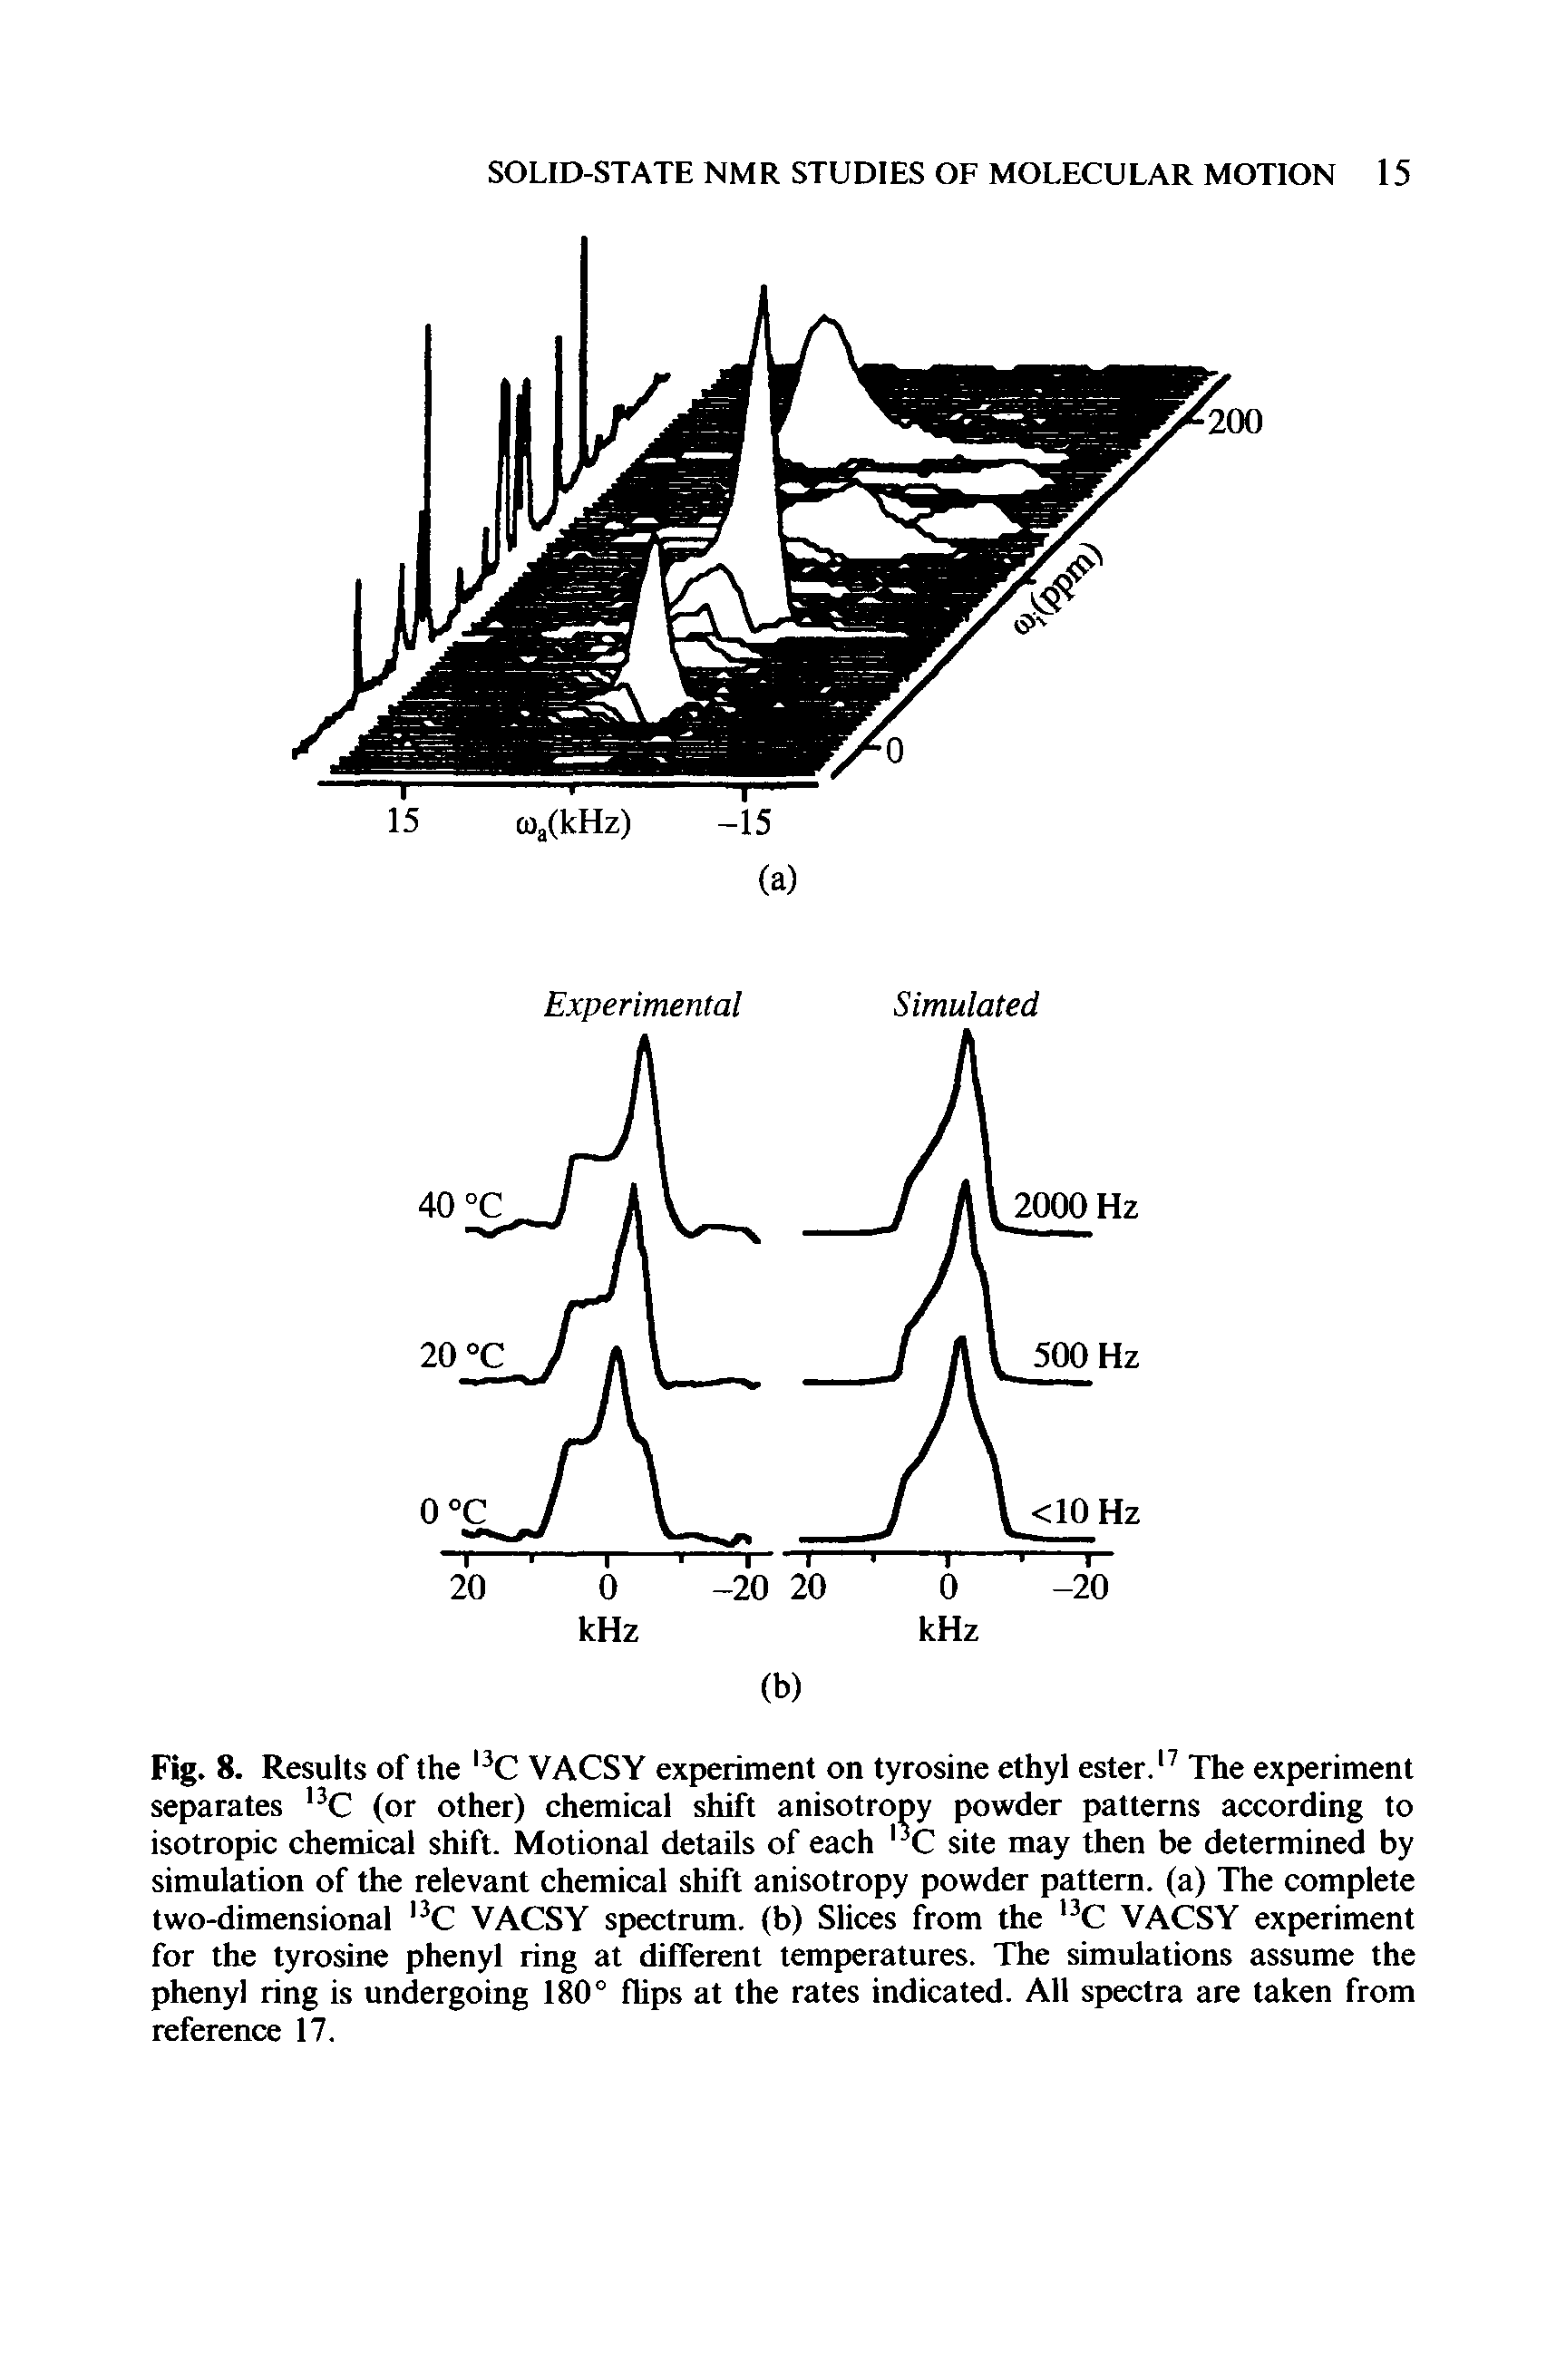 Fig. 8. Results of the l3C VACSY experiment on tyrosine ethyl ester.17 The experiment separates 13C (or other) chemical shift anisotropy powder patterns according to isotropic chemical shift. Motional details of each 3C site may then be determined by simulation of the relevant chemical shift anisotropy powder pattern, (a) The complete two-dimensional l3C VACSY spectrum, (b) Slices from the l3C VACSY experiment for the tyrosine phenyl ring at different temperatures. The simulations assume the phenyl ring is undergoing 180° flips at the rates indicated. All spectra are taken from reference 17.